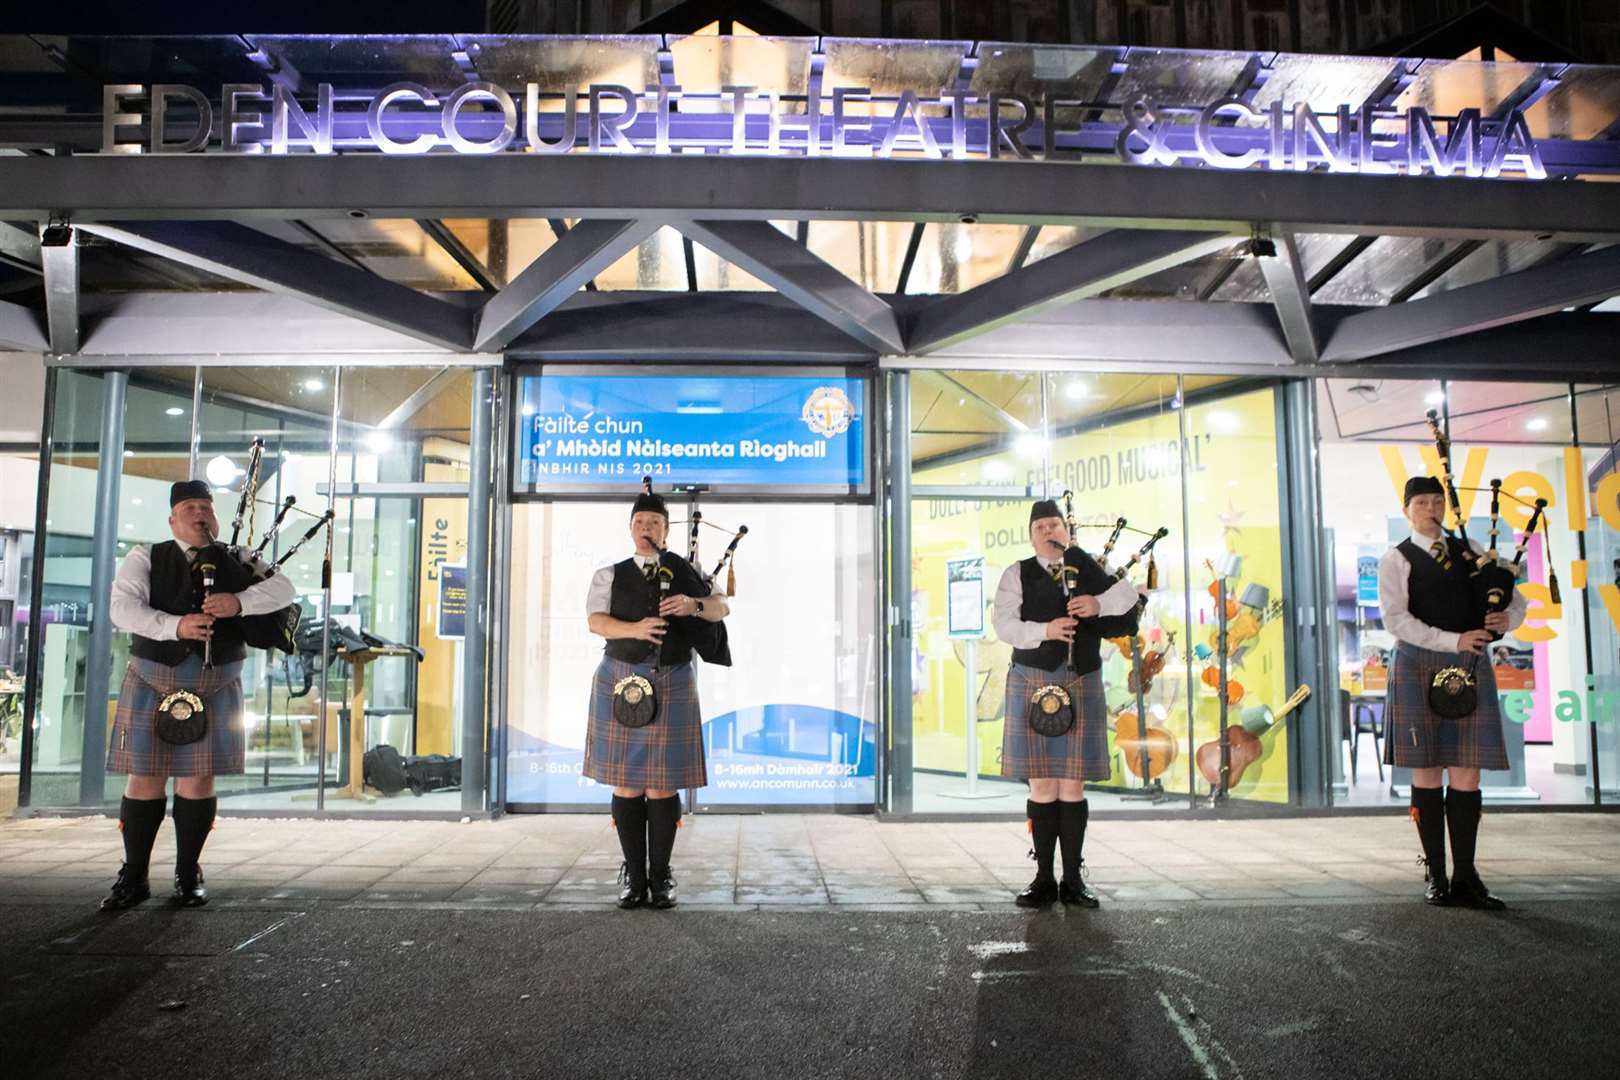 Members of City of Inverness Pipe Band warmly welcome live audiences to Eden Court Theatre for the opening night of The Royal National Mòd 2021 in Inverness